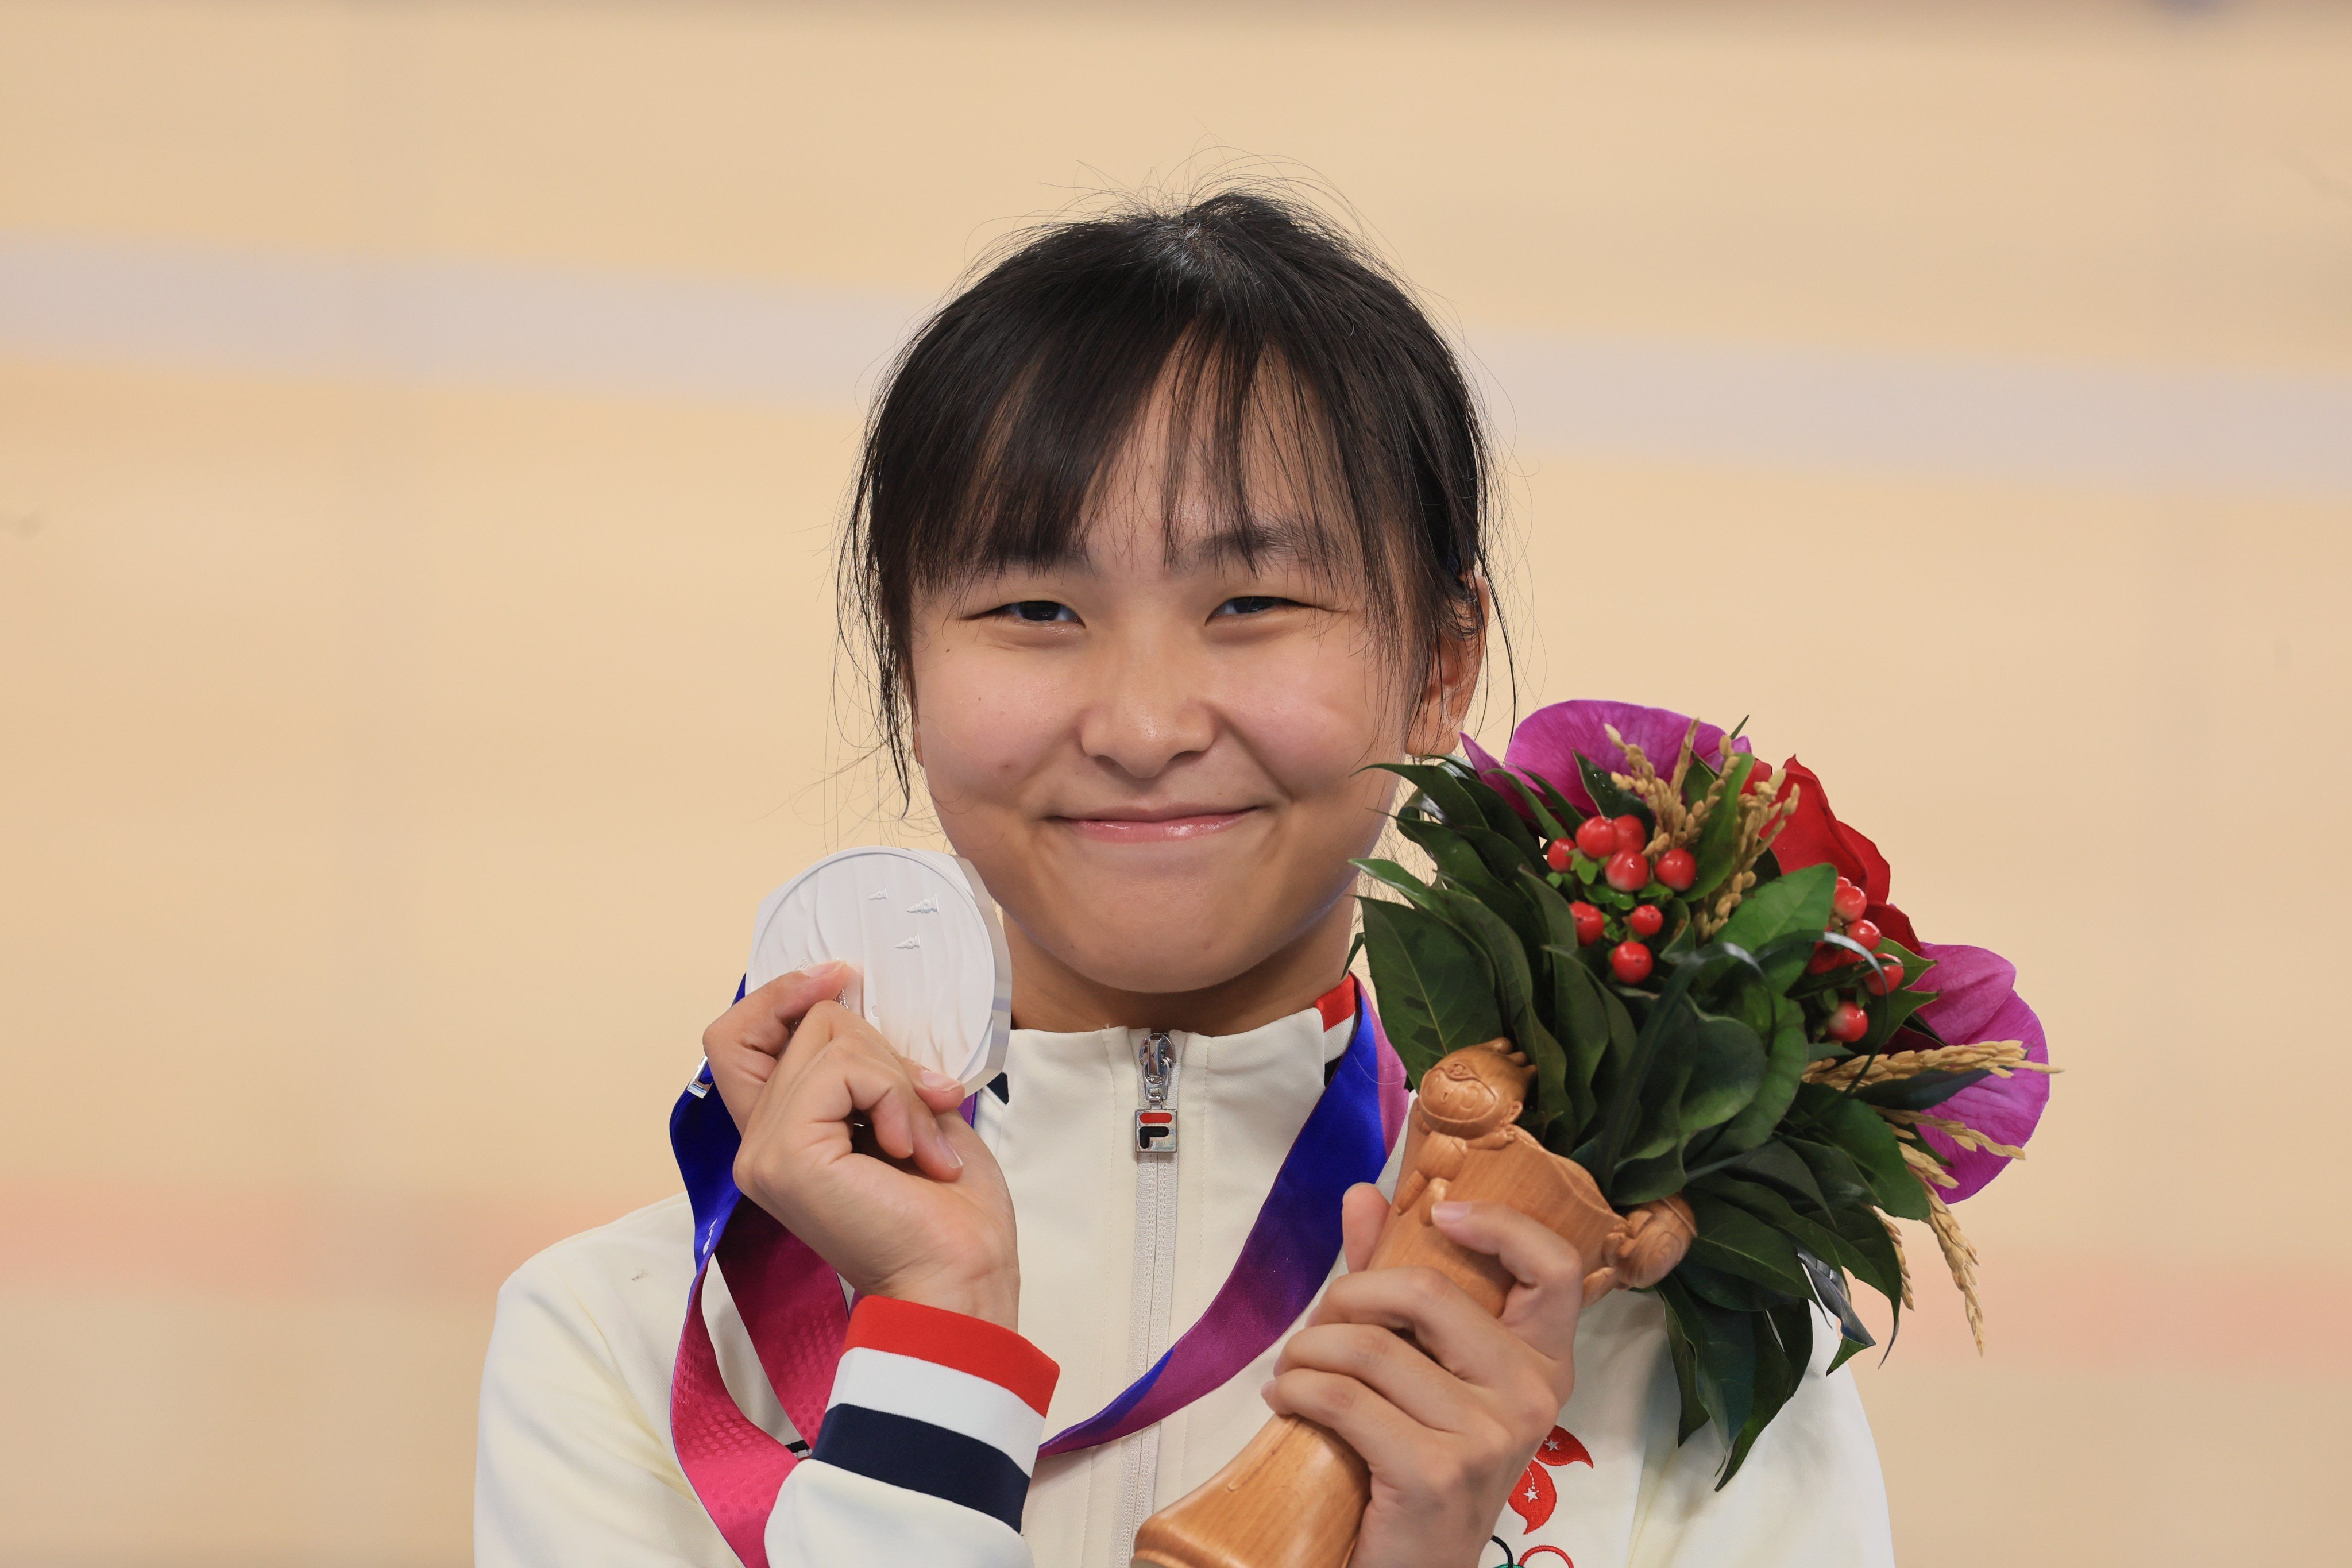 Ceci Lee Sze-wing gets silver medal during award-presentation  ceremony on Cycling Track-Women’s Omnium during the Hangzhou 2022 Asian Games, Chun’ An Jieshou Sports Centre Velodrome at Tonglu. 28SEP23 Dickson Lee